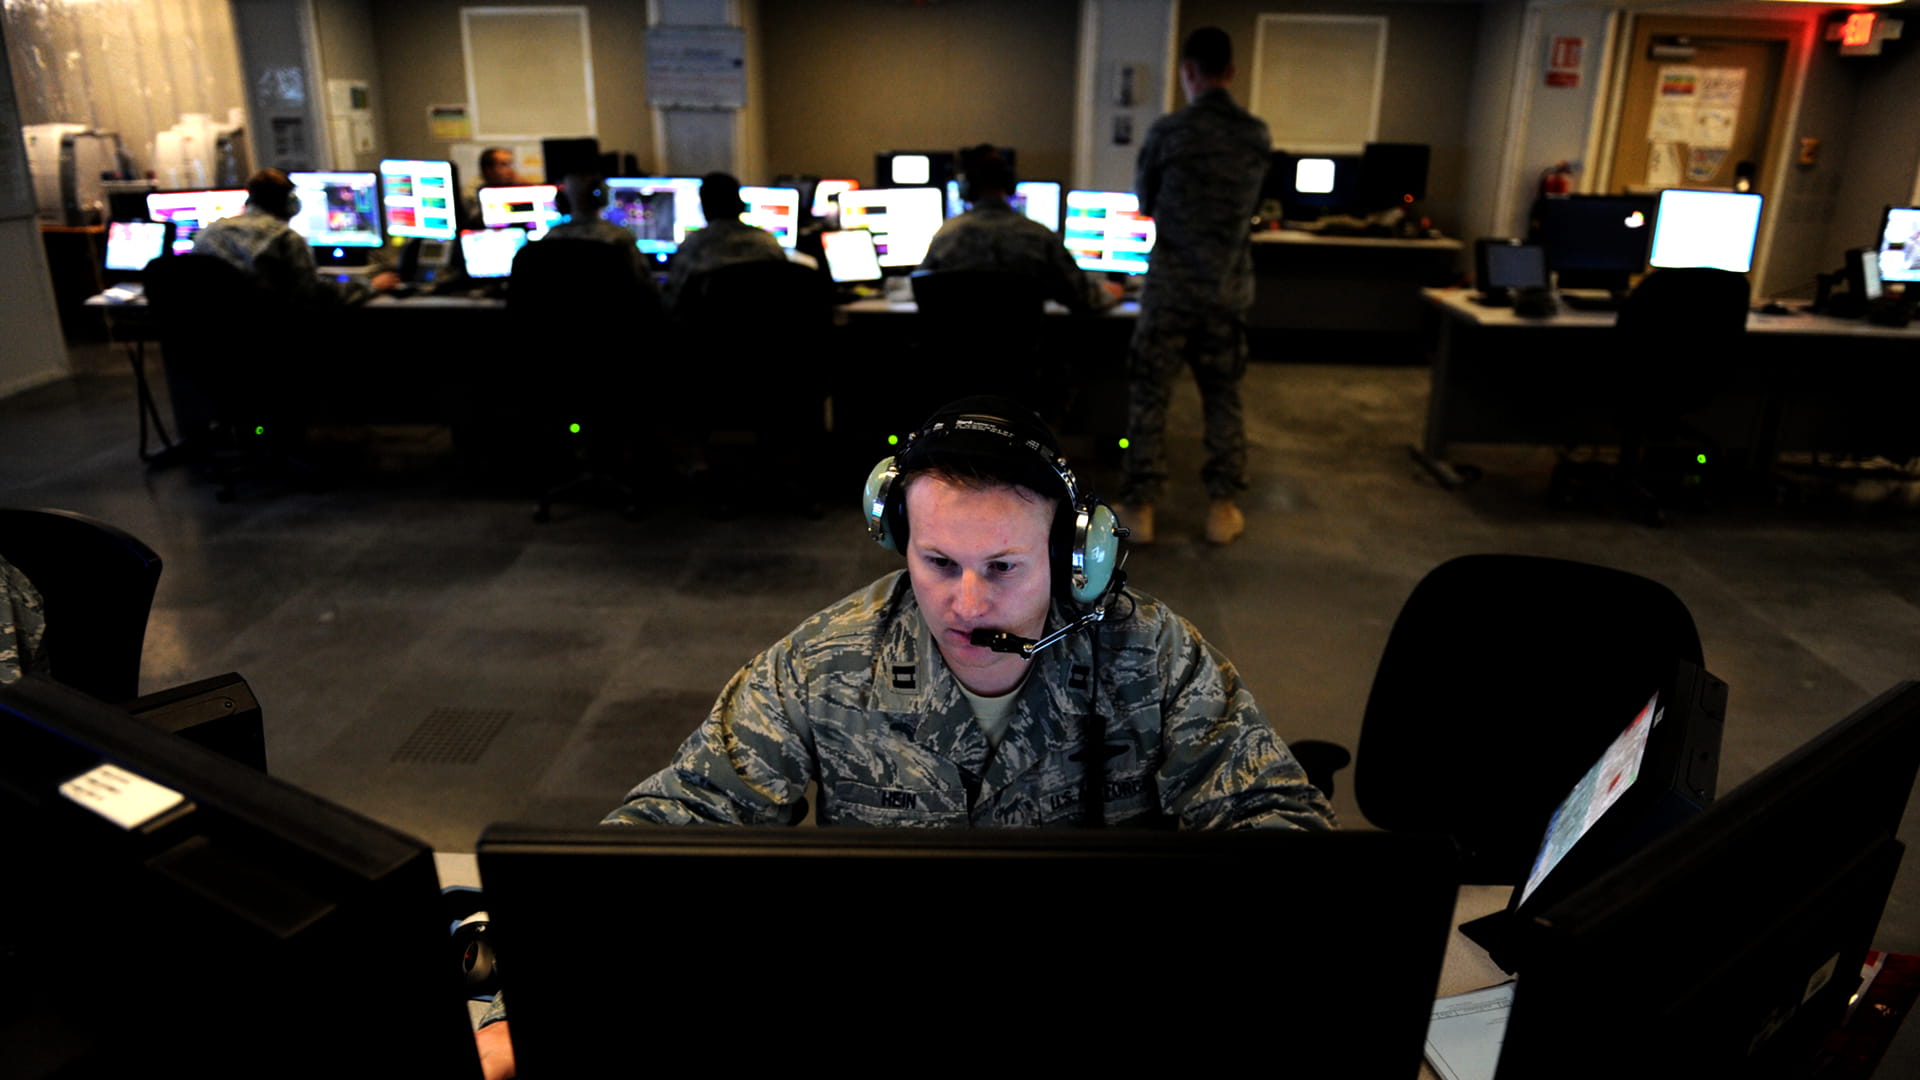 Military personnel on dispatch